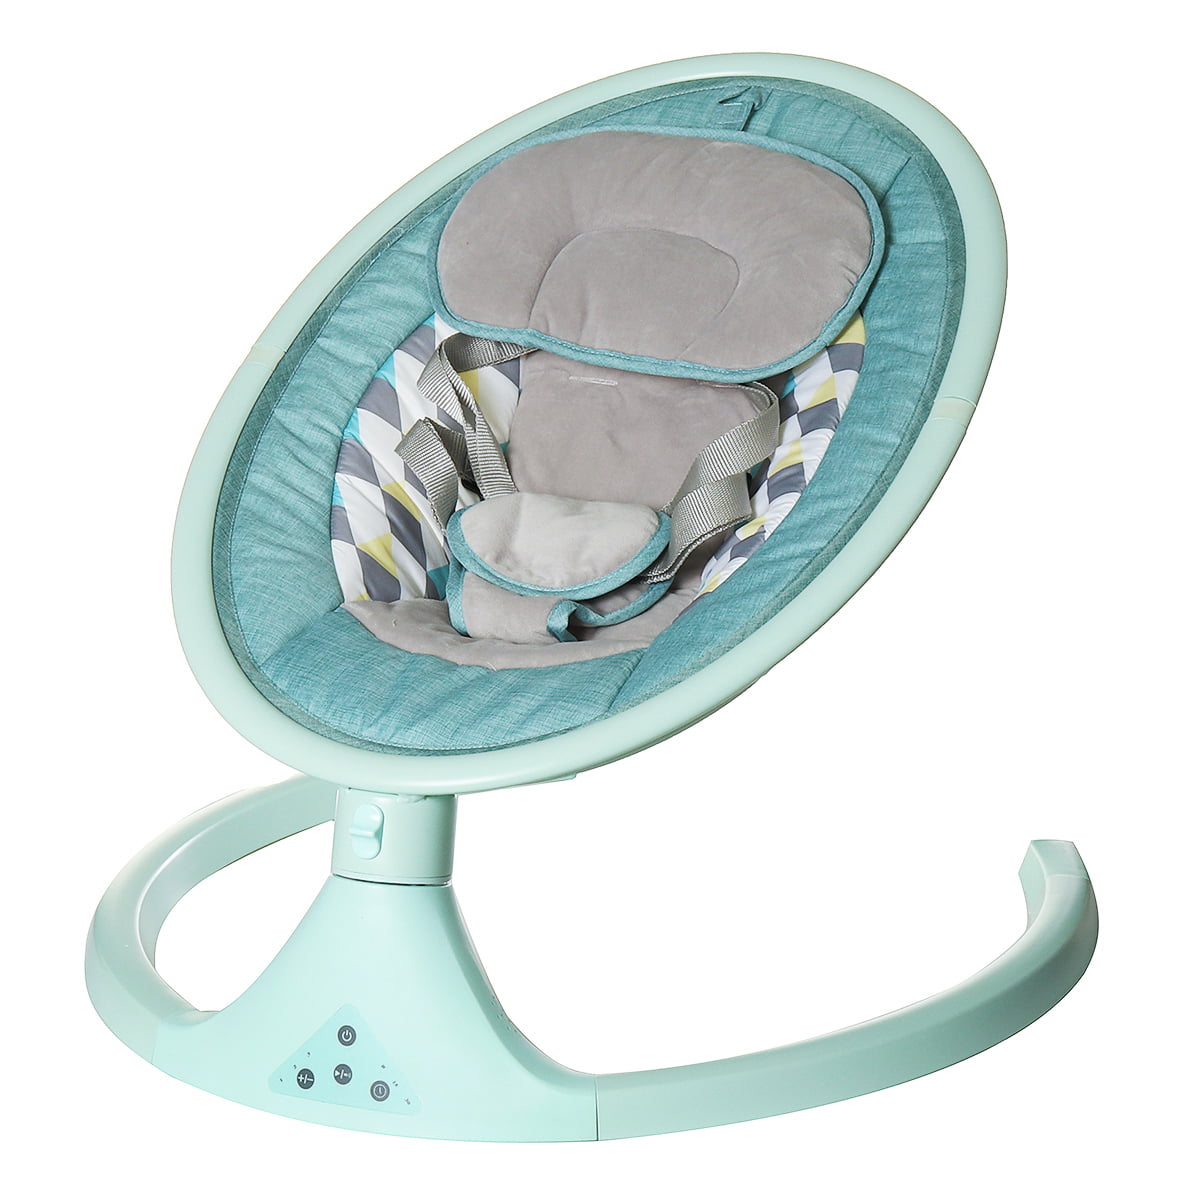 Blue Electric Baby Cradle Bouncer Musical Rocker Seat with Net Foldable Infant Toddler Swing with 3 Speeds Remote Control for Home 0-18 Months DNYSYSJ Baby Rocking Chair 